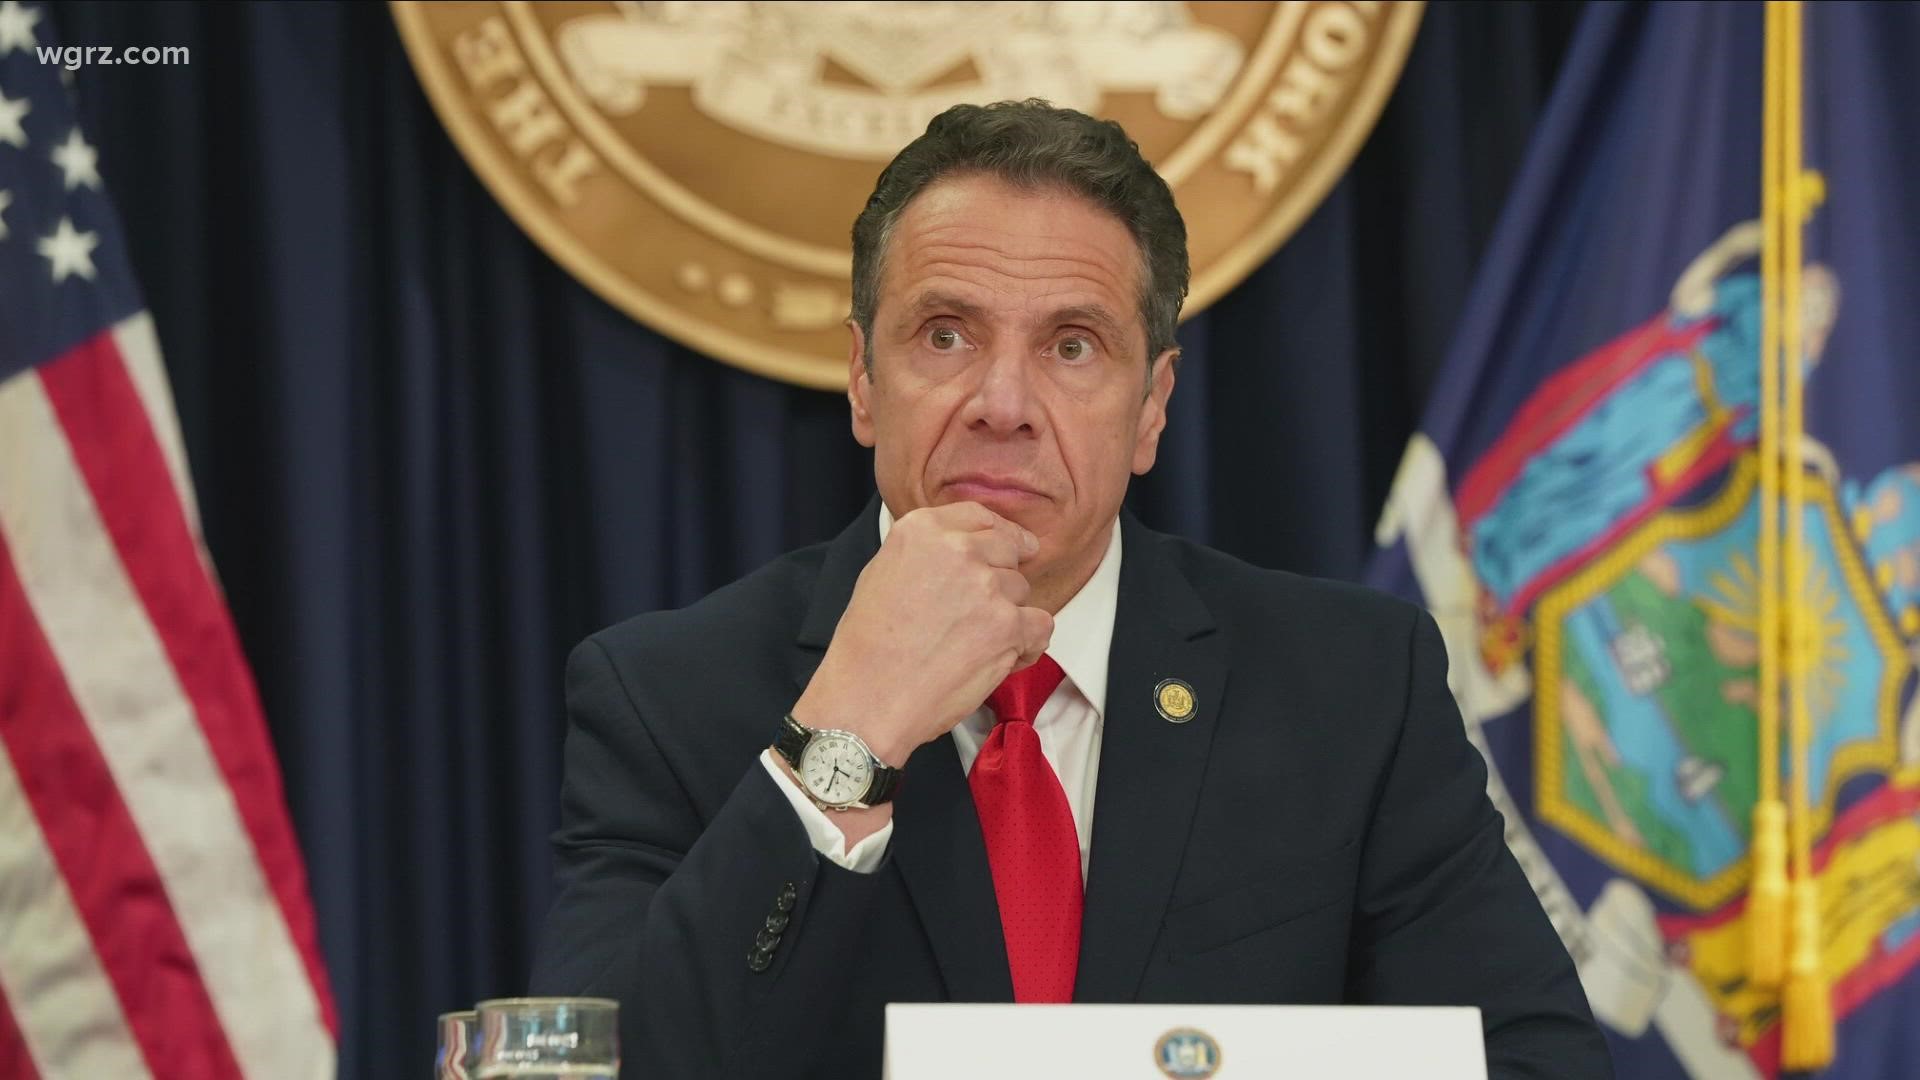 The acting Nassau County district attorney said an investigation found allegations against Cuomo 'credible, deeply troubling, but not criminal under New York law.'